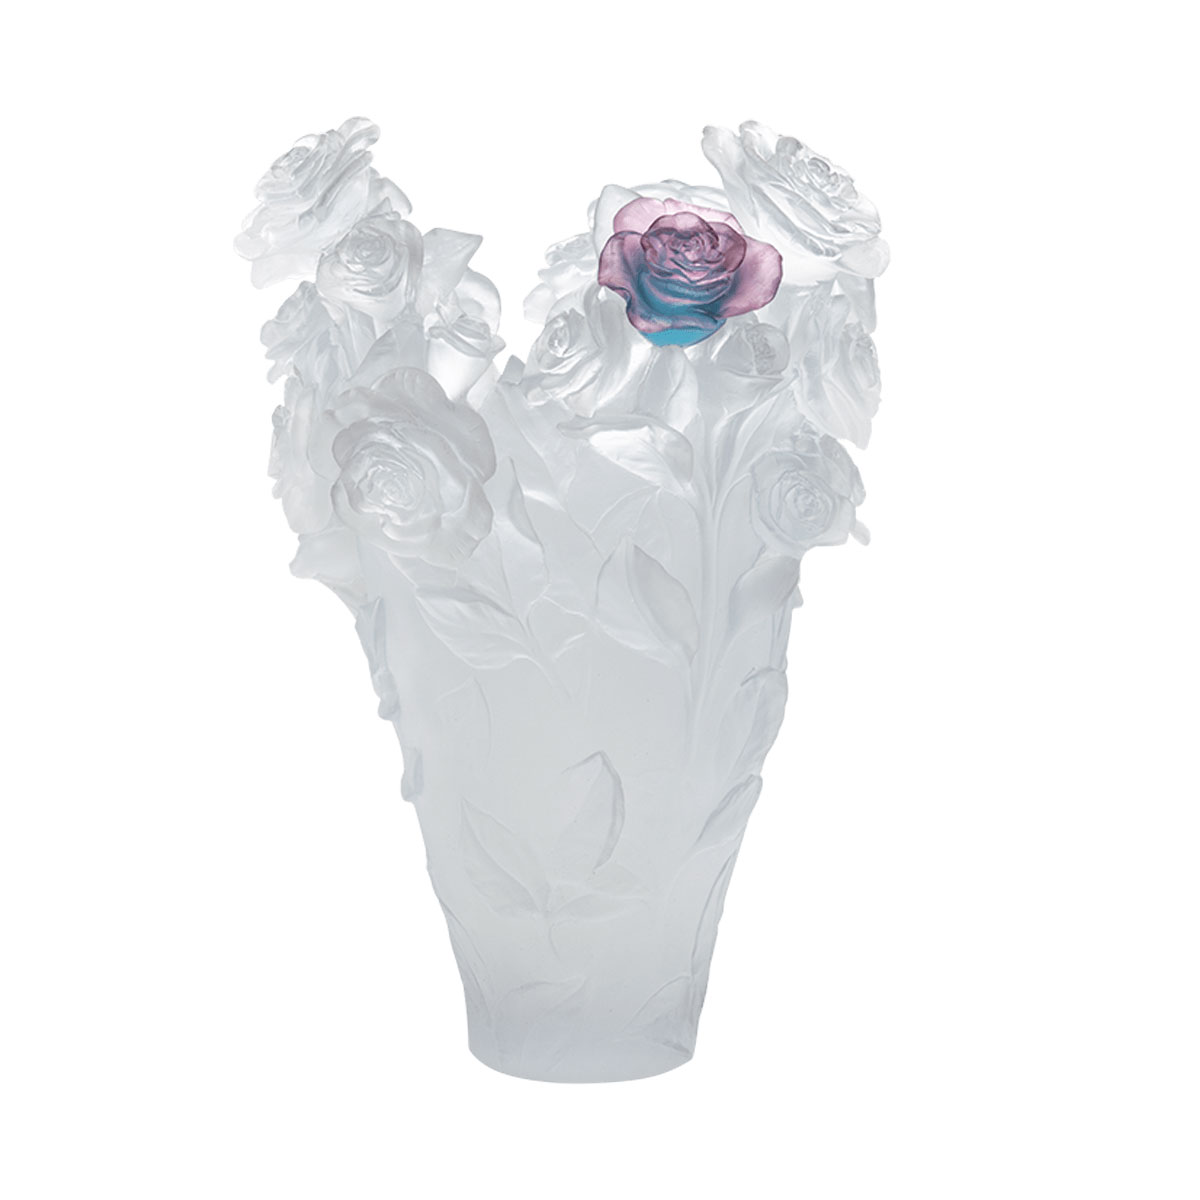 Daum Magnum Rose Passion Vase in White with Green and Pink Flower, Limited Edition